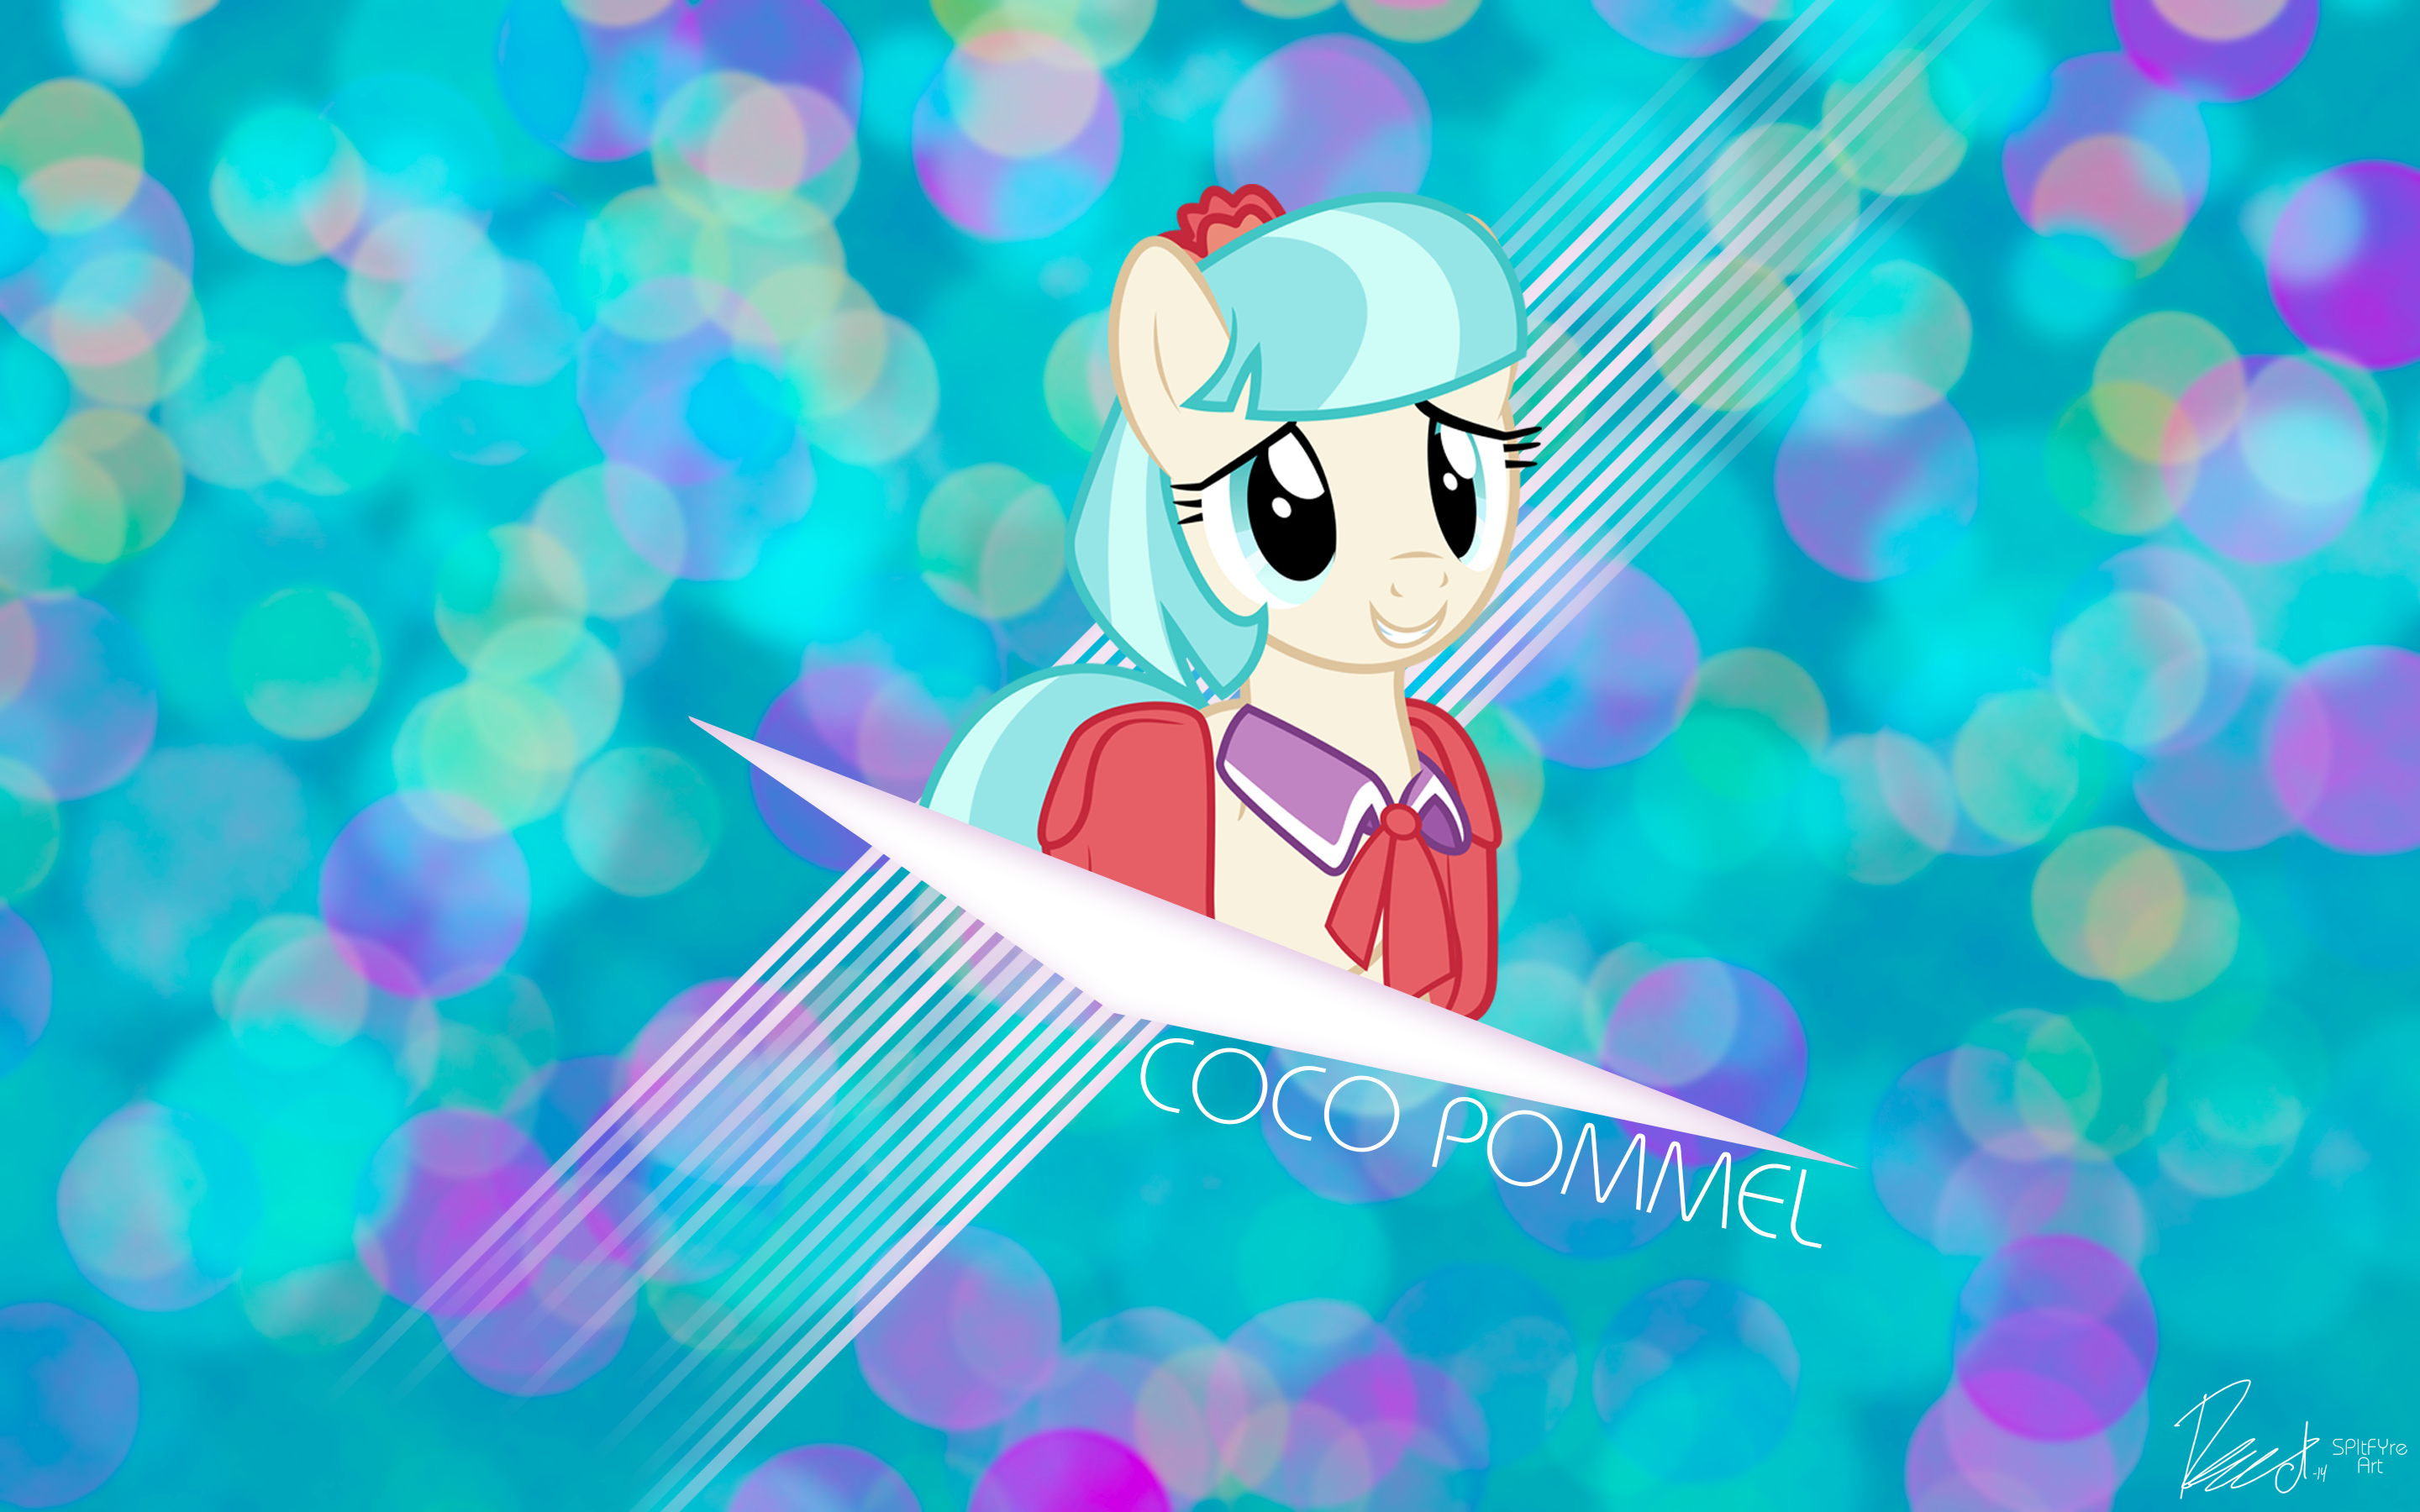 Coco Pommel by CaNoN-lb and centerdave77